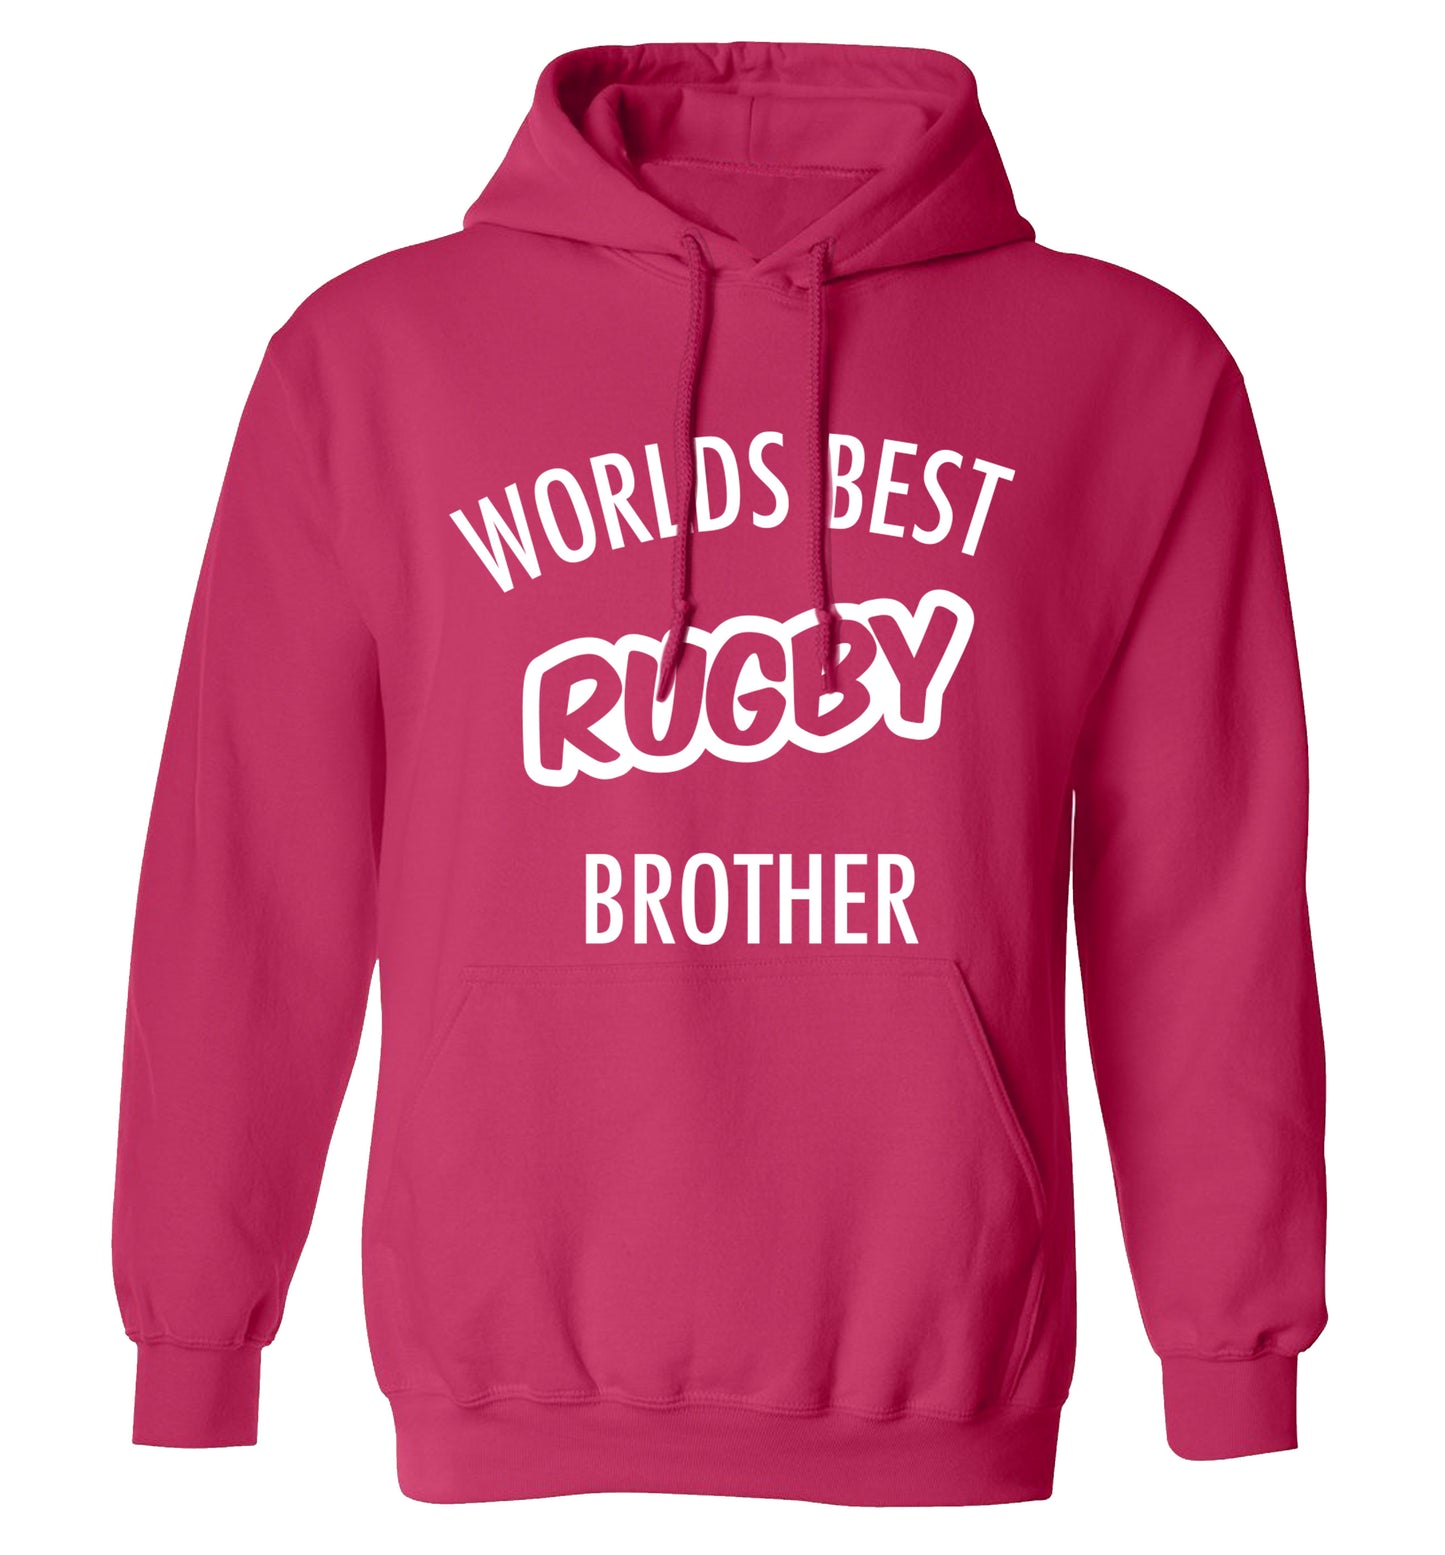 Worlds best rugby brother adults unisex pink hoodie 2XL